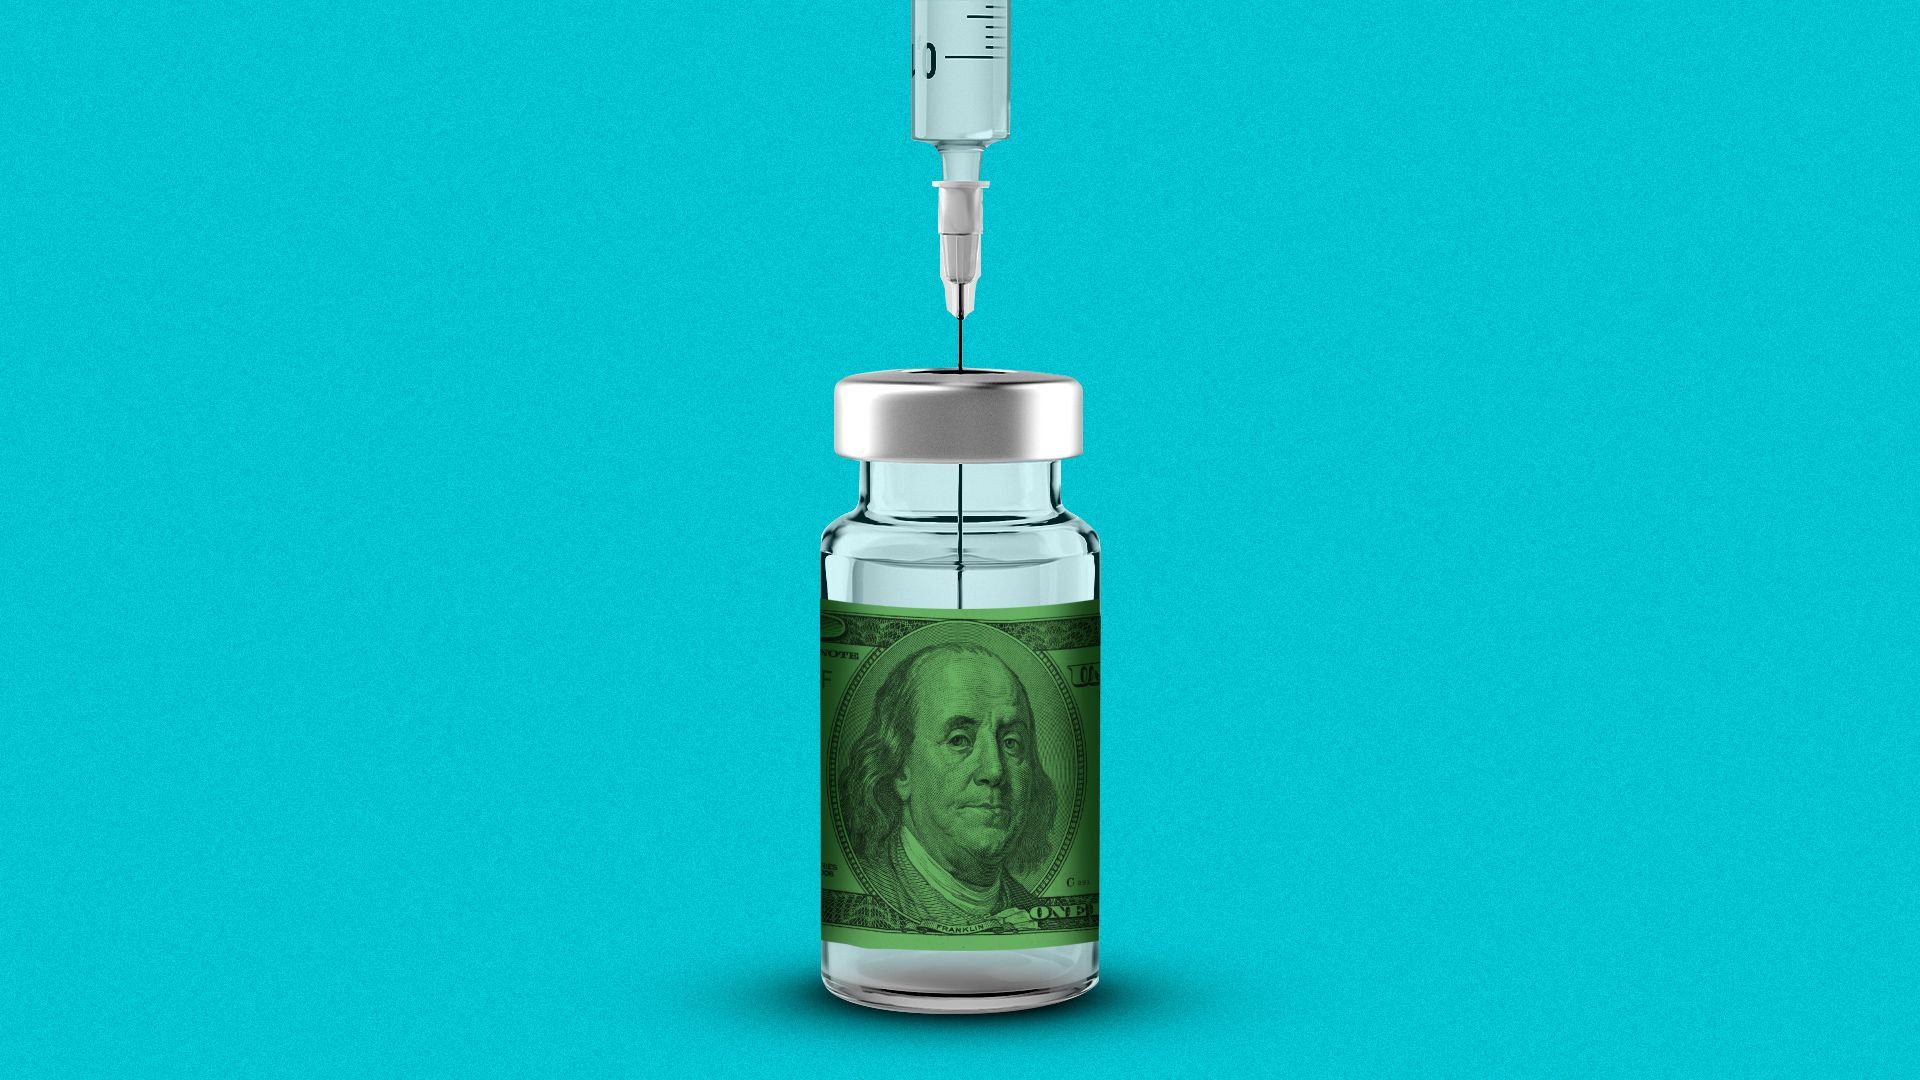 Illustration of a syringe pulling from a vial with a hundred dollar bill as a label.  